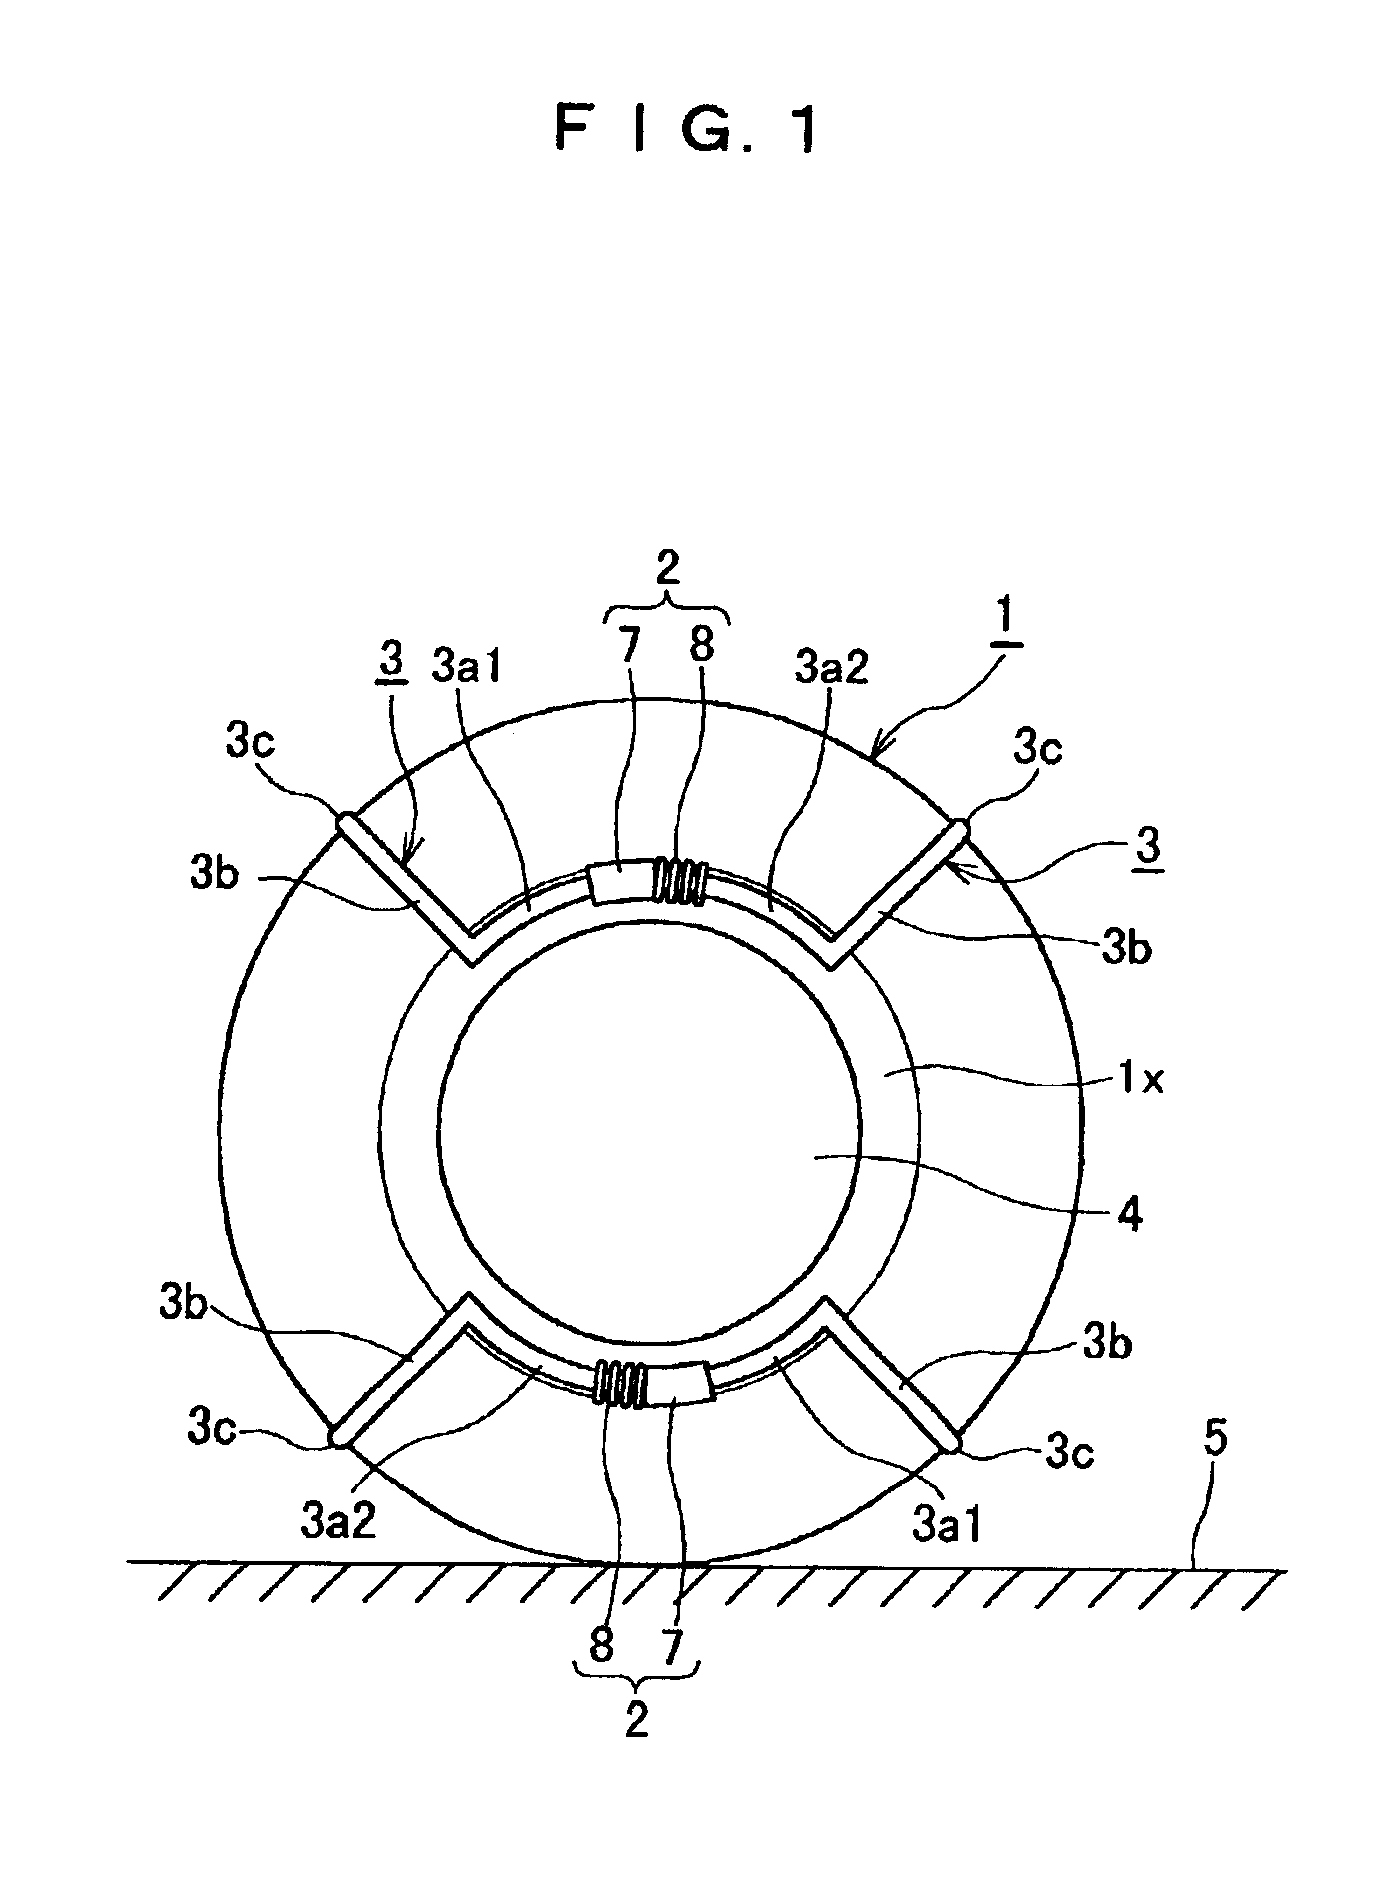 Slip-preventing device for vehicle tire